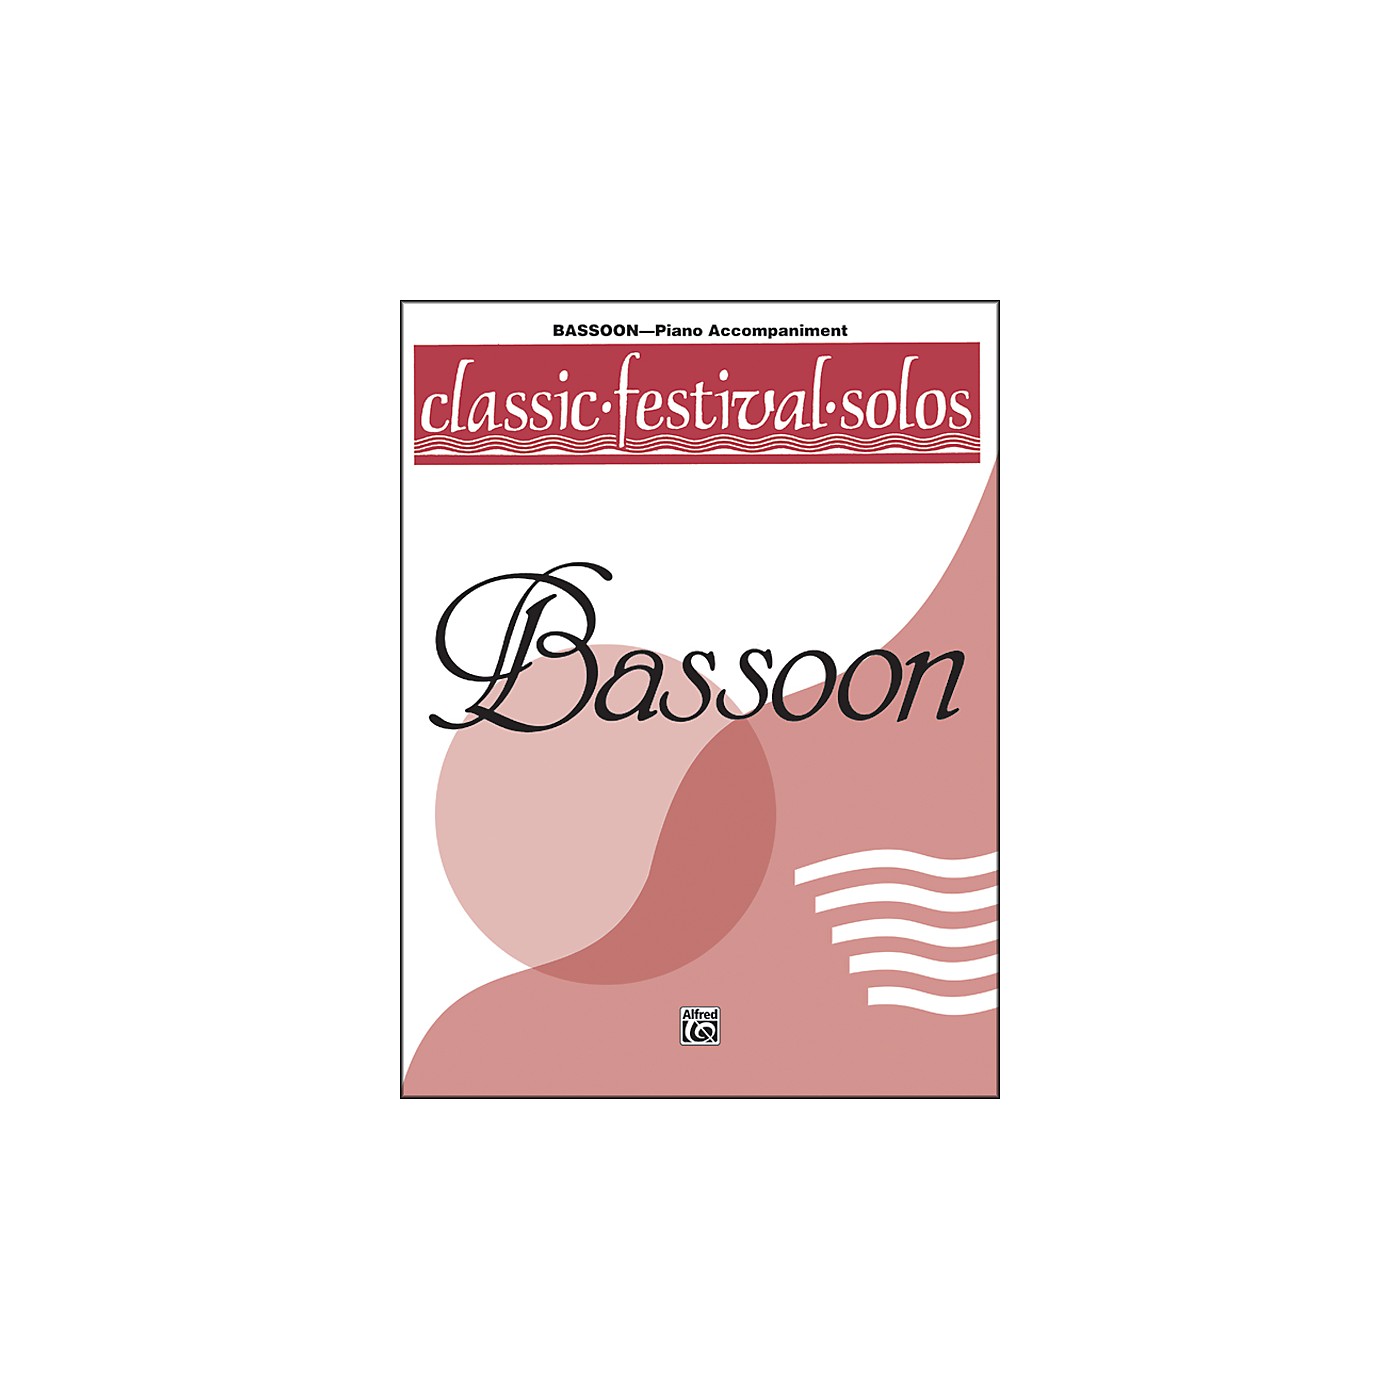 Alfred Classic Festival Solos (Bassoon) Volume 1 Piano Acc. thumbnail